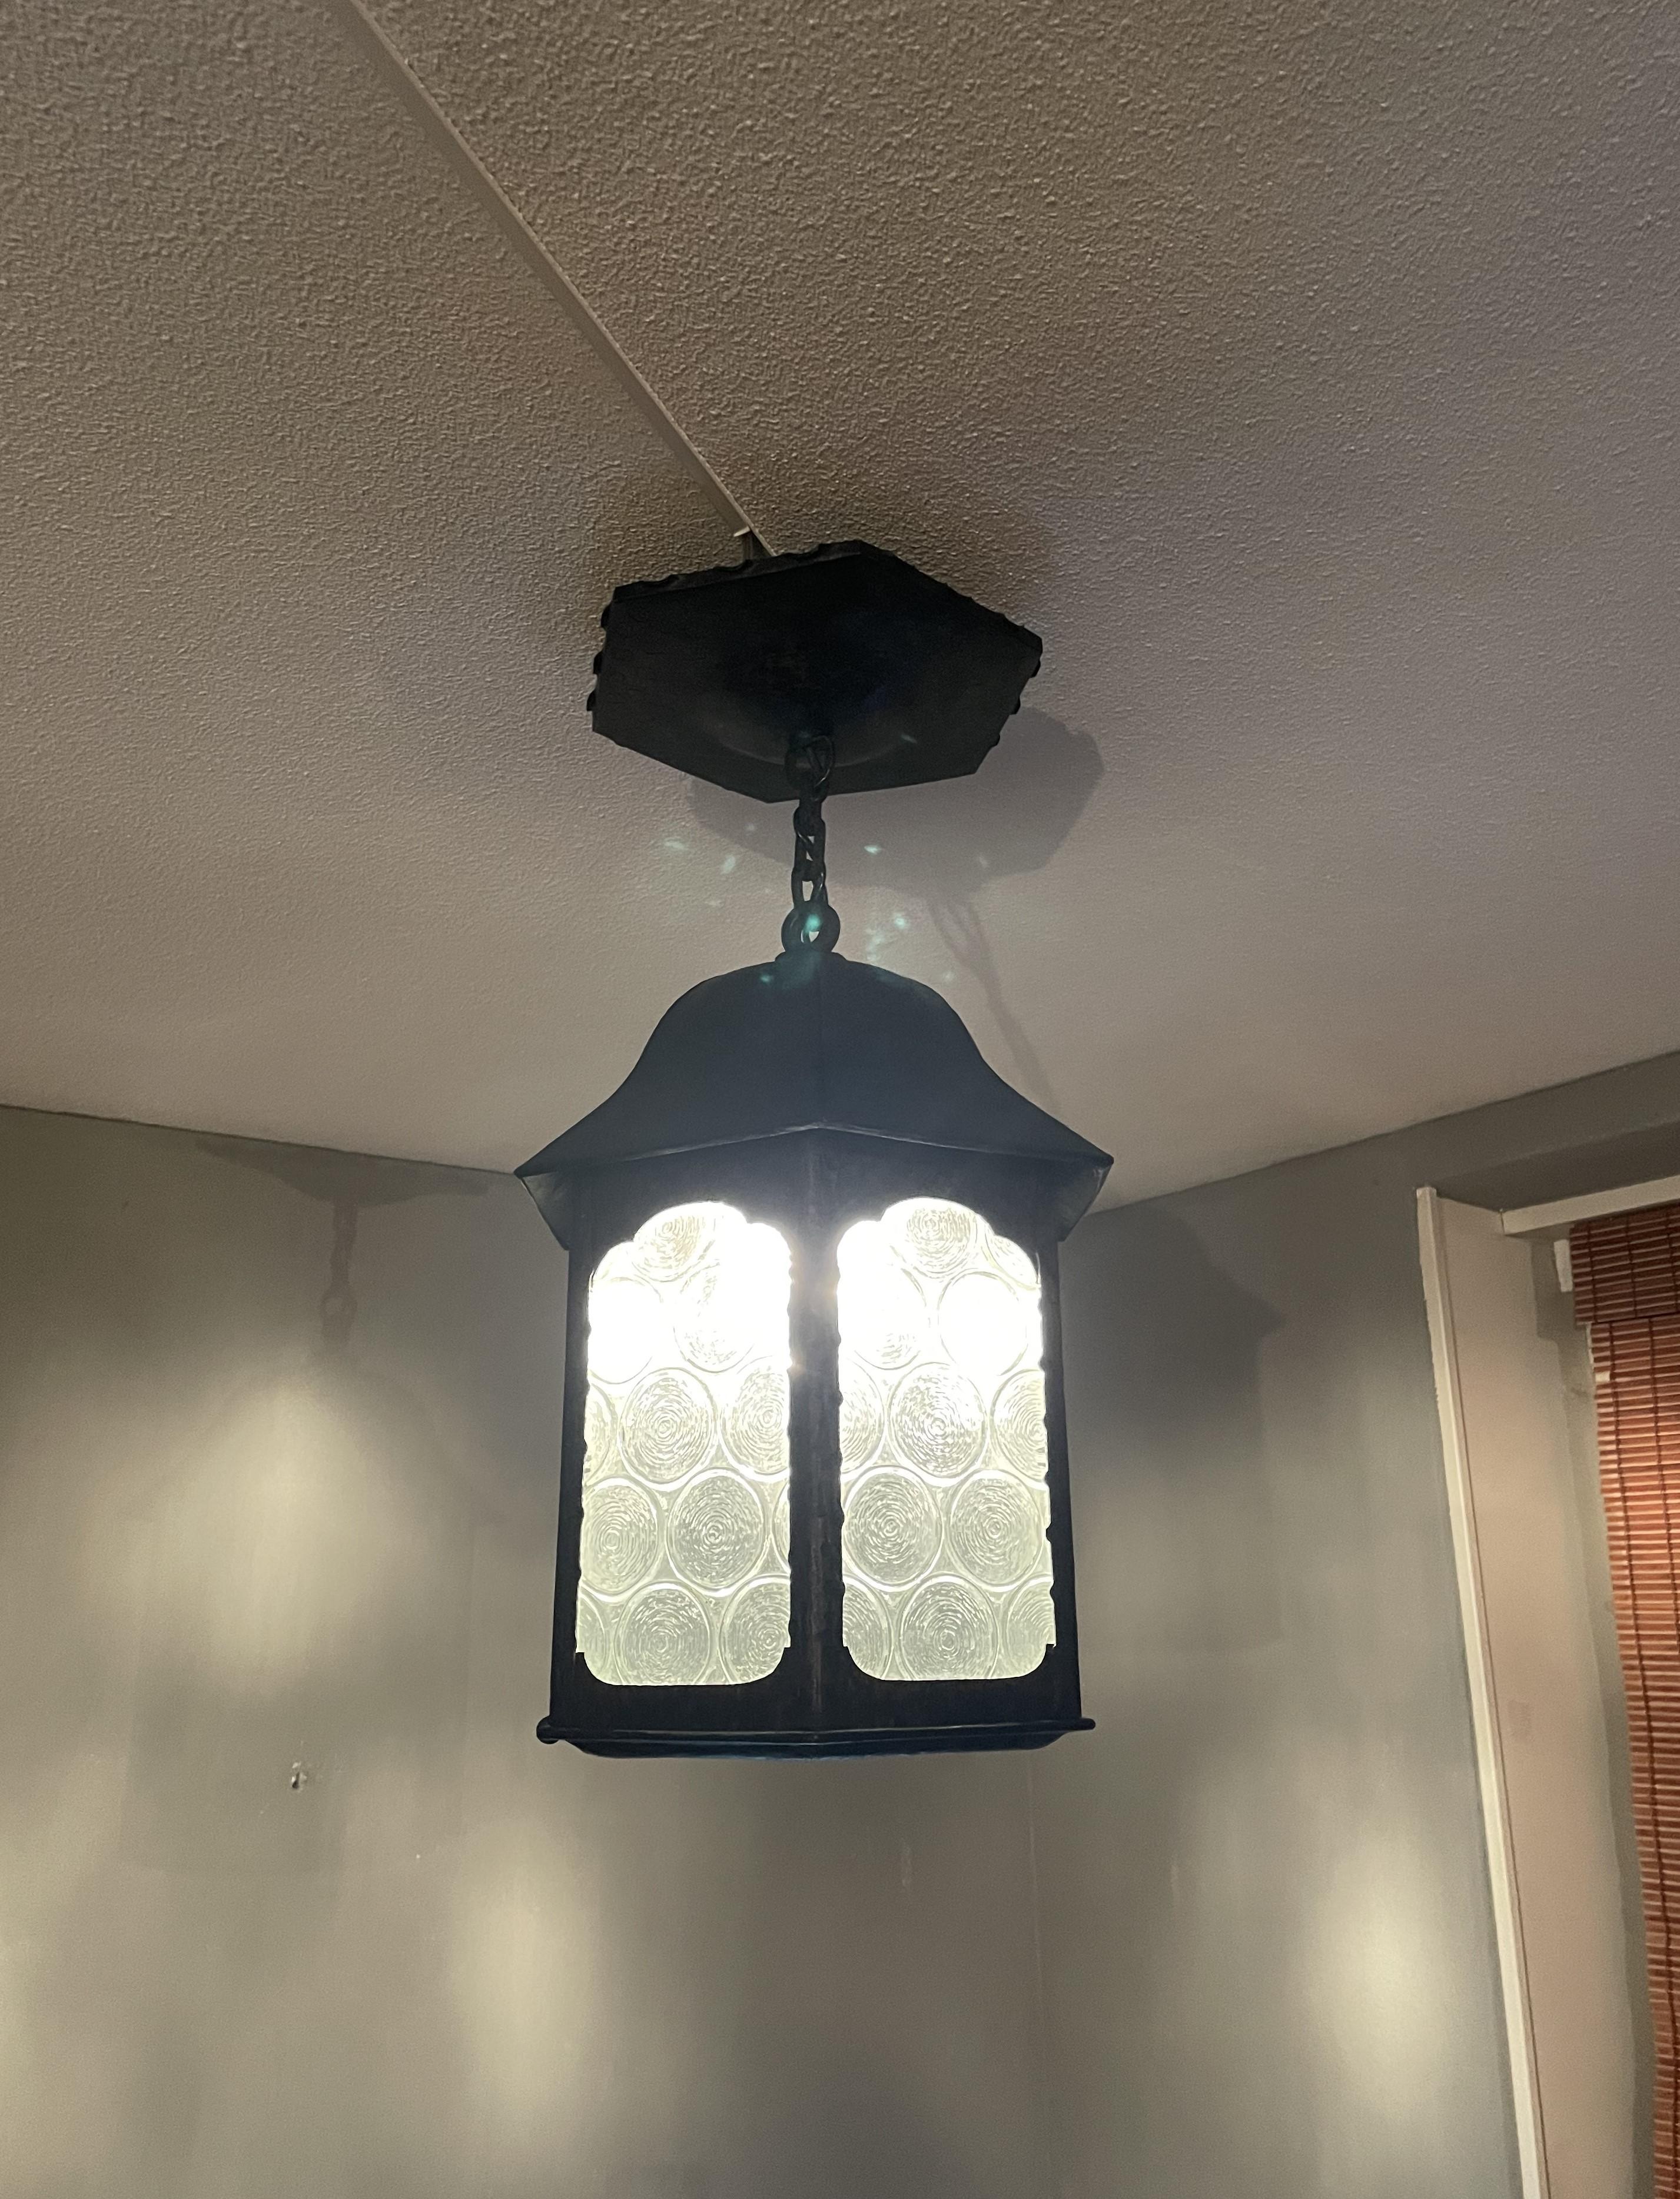 Stunning Gothic Style hallway or porch lantern.

If you are looking for a unique lantern for your porch or hallway and you like the unique look and feel of this Gothic Revival light fixture then this work of beauty could be yours to own and enjoy